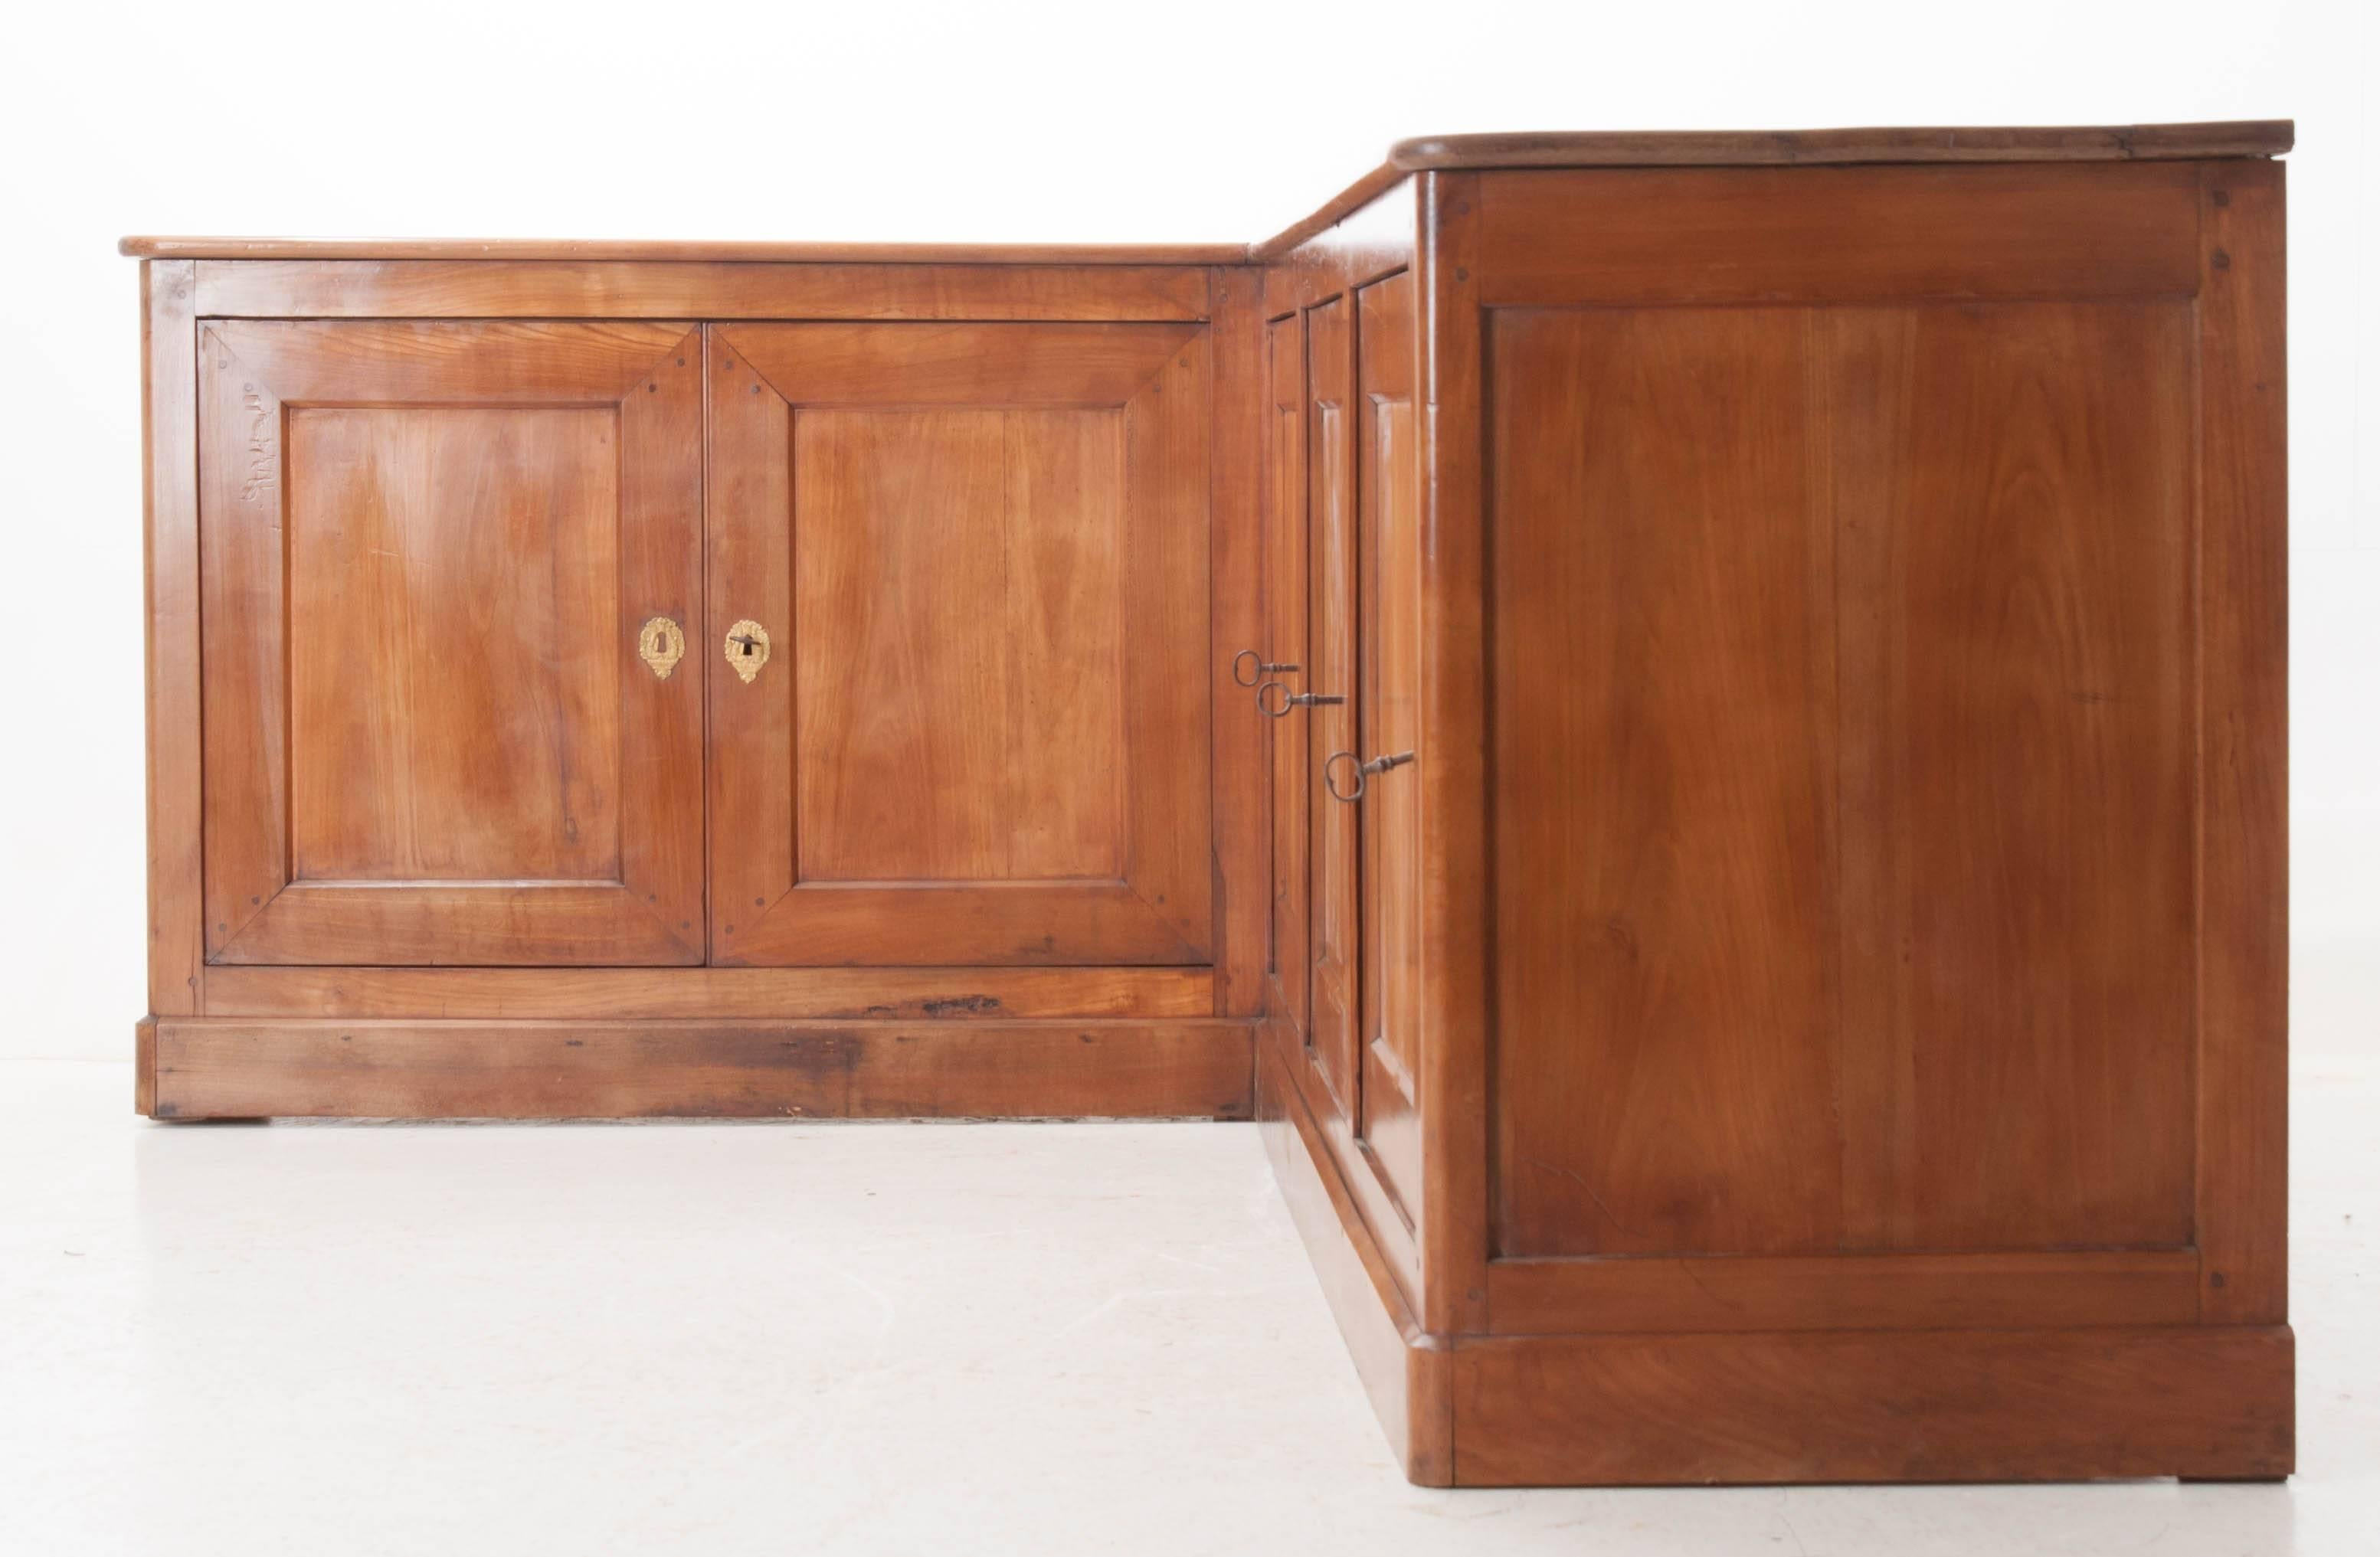 A beautiful, large French 19th century cherry Louis Philippe corner enfilade. Five lockable doors with decorative brass escutcheons are hung on hidden hinges. These doors conceal the interior cavities that provide abundant storage. These are